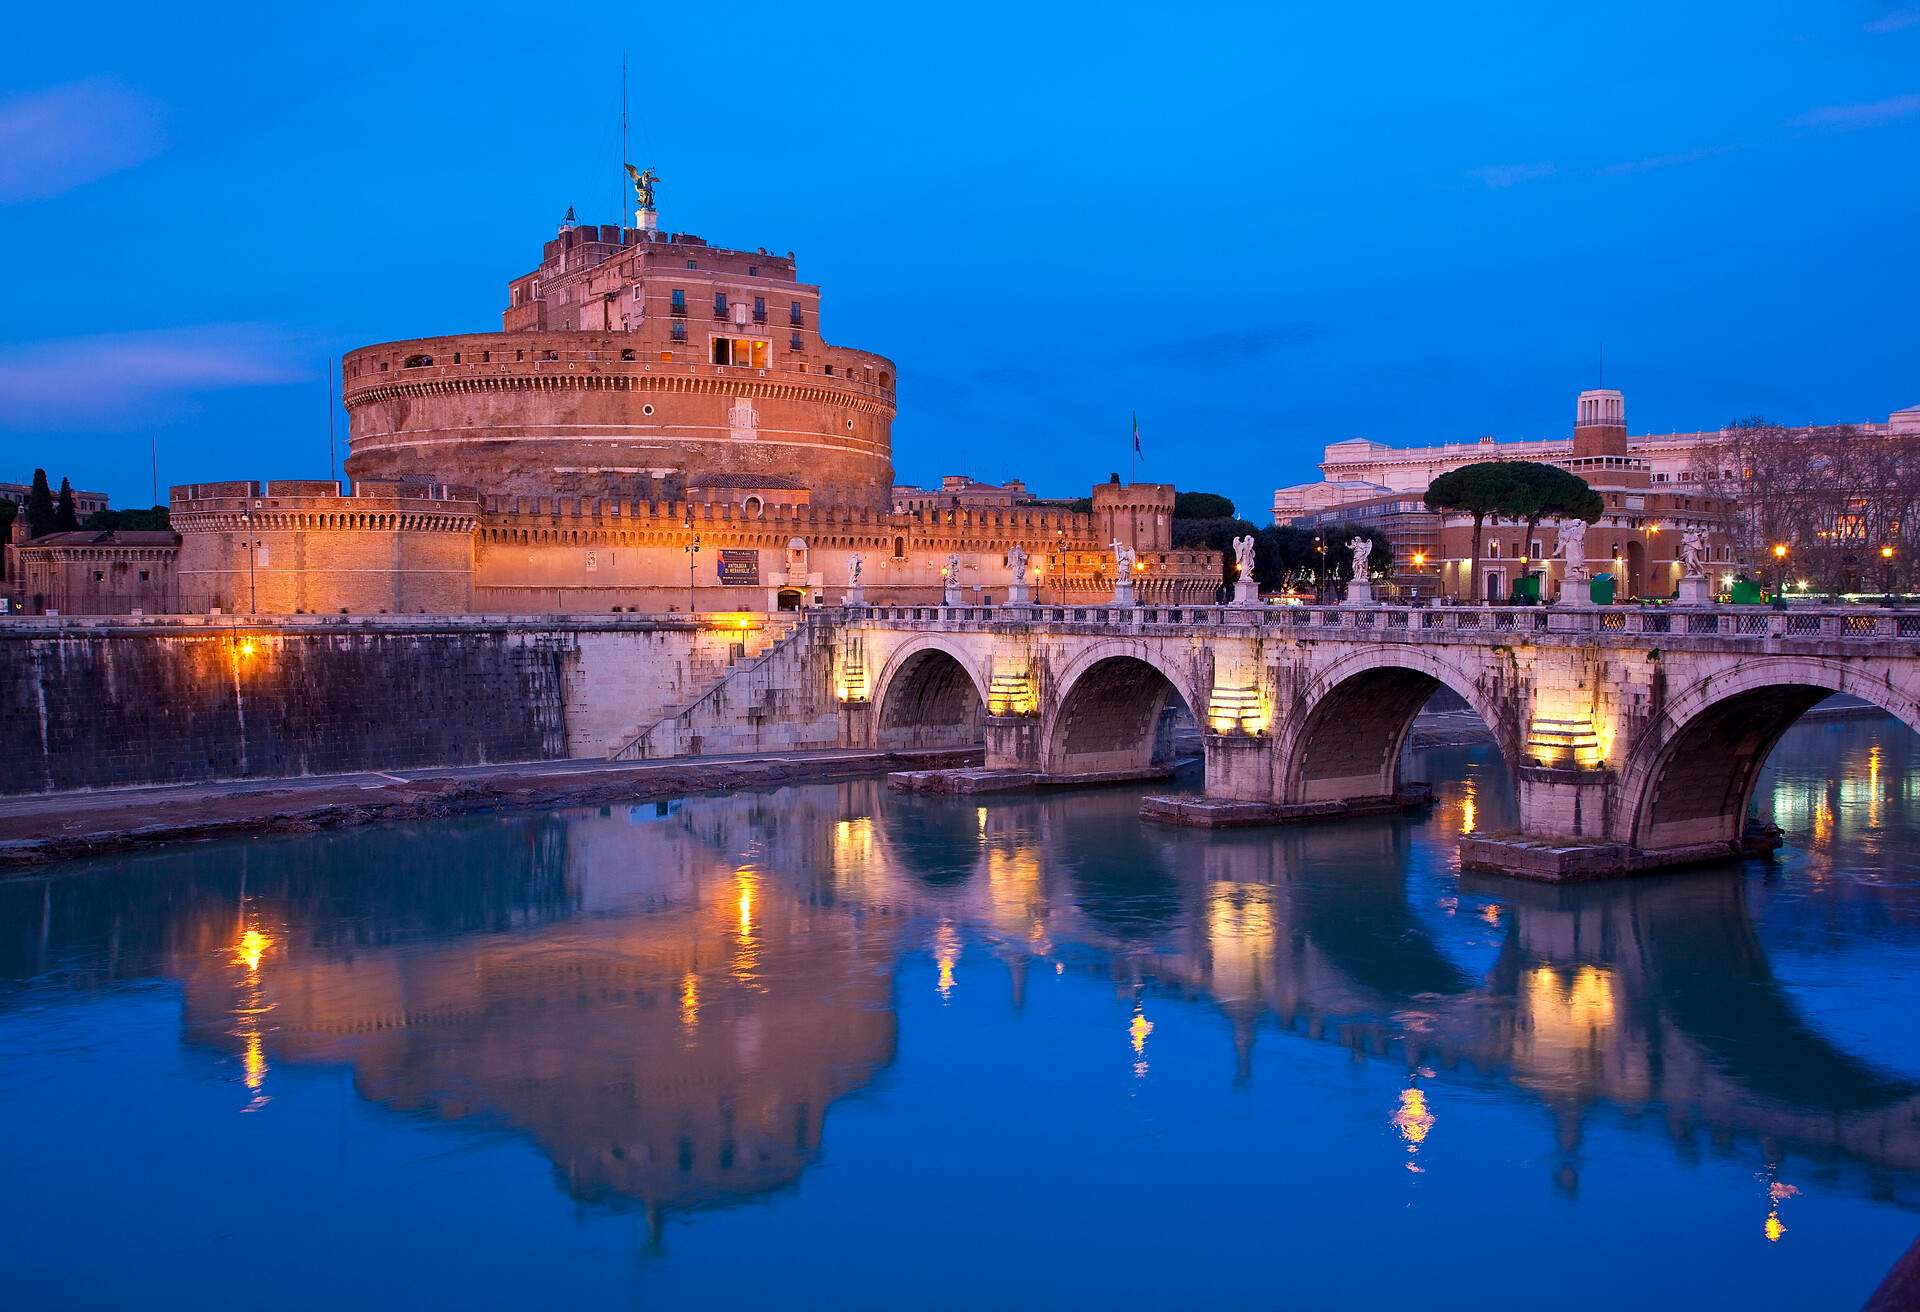 DEST_ITALY_ROME_CASTEL_SANT_ANGELO_GettyImages